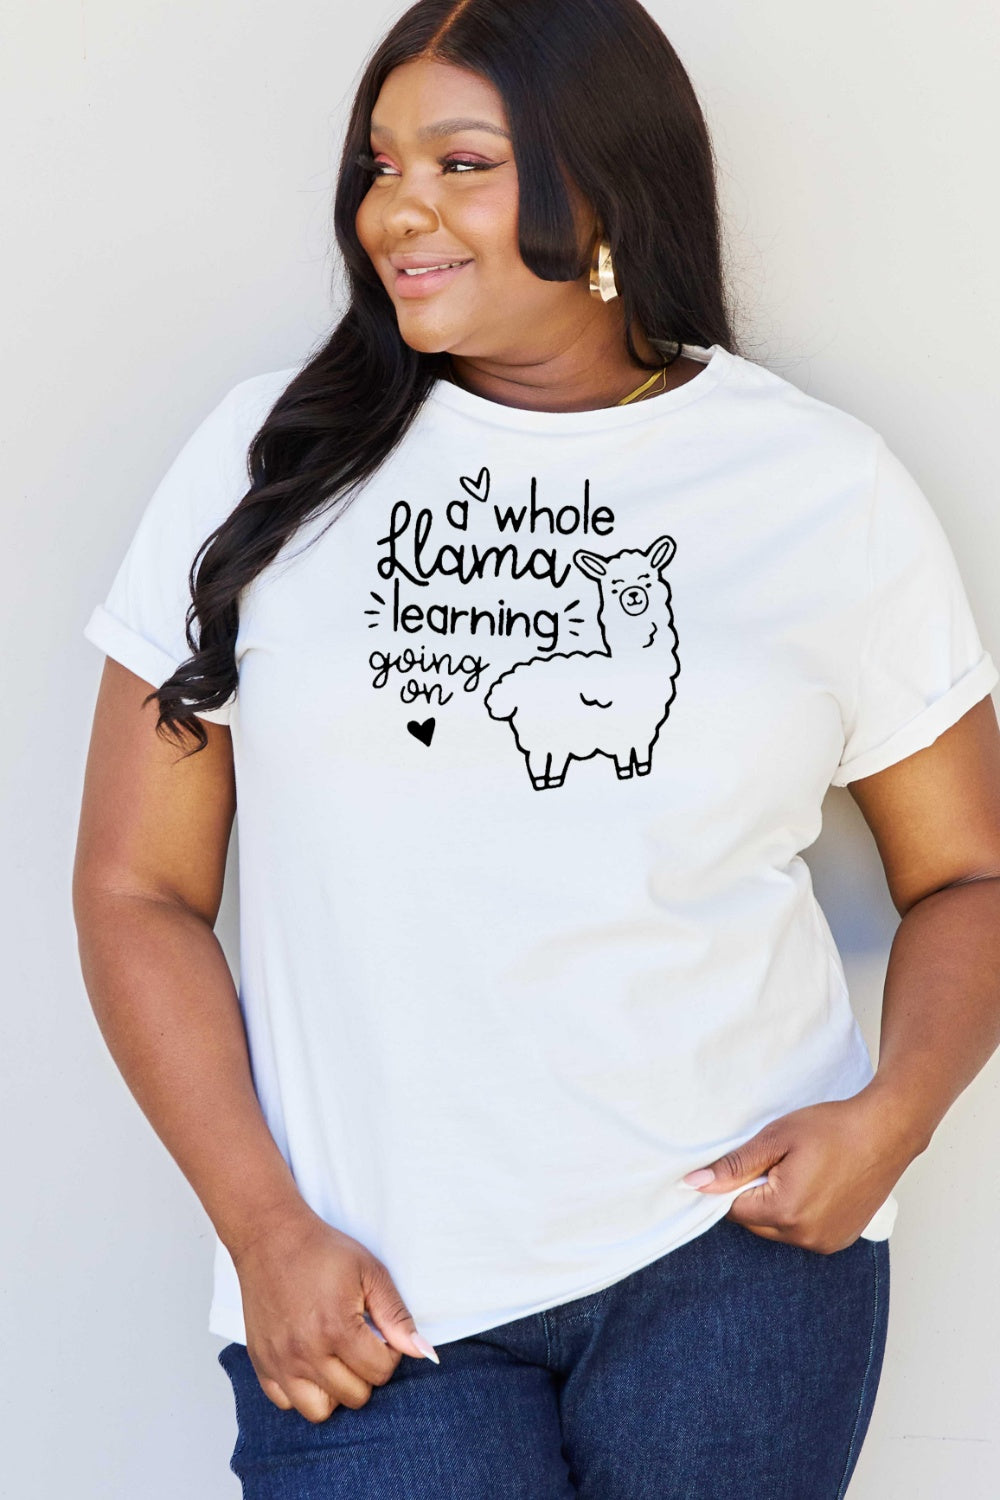 A WHOLE LLAMA LEARNING Graphic T-Shirt